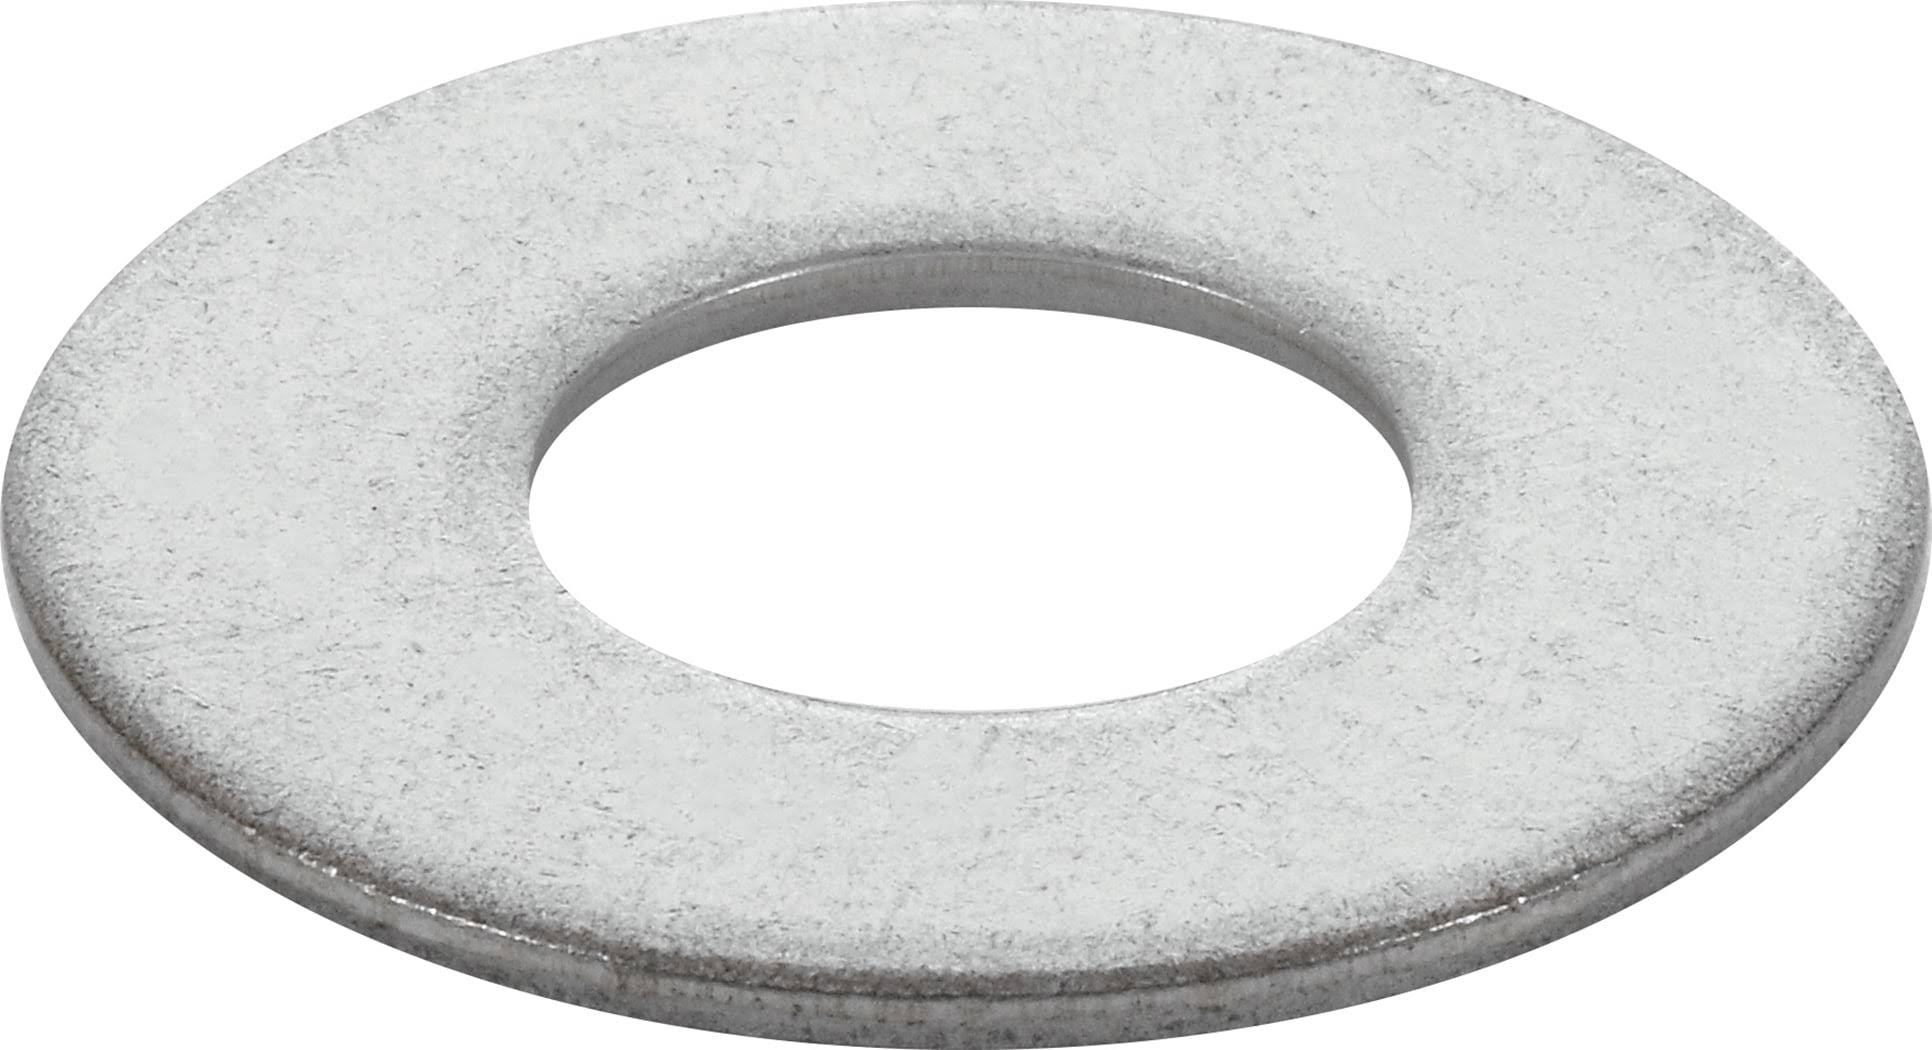 The Hillman Group 270055 Flat Zinc Washer 1/4-Inch 100-Pack 